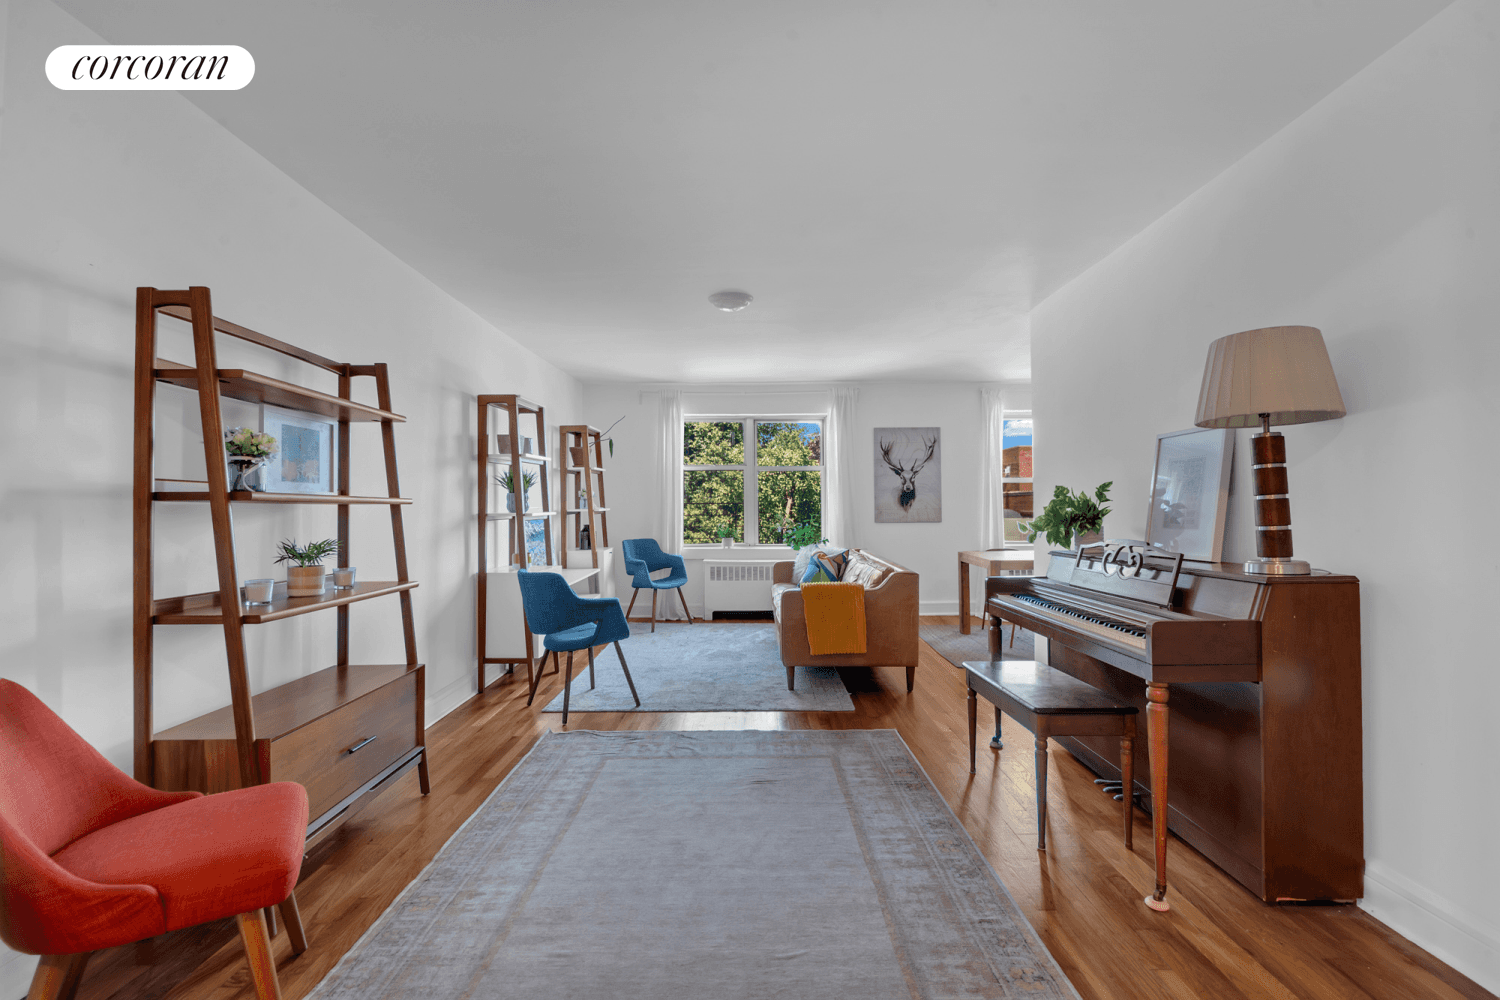 PEACEFUL SETTING ! Introducing 100 Park Terrace West, Unit 3F a piece of serenity nestled in the heart of Inwood, NYC's hidden gem !